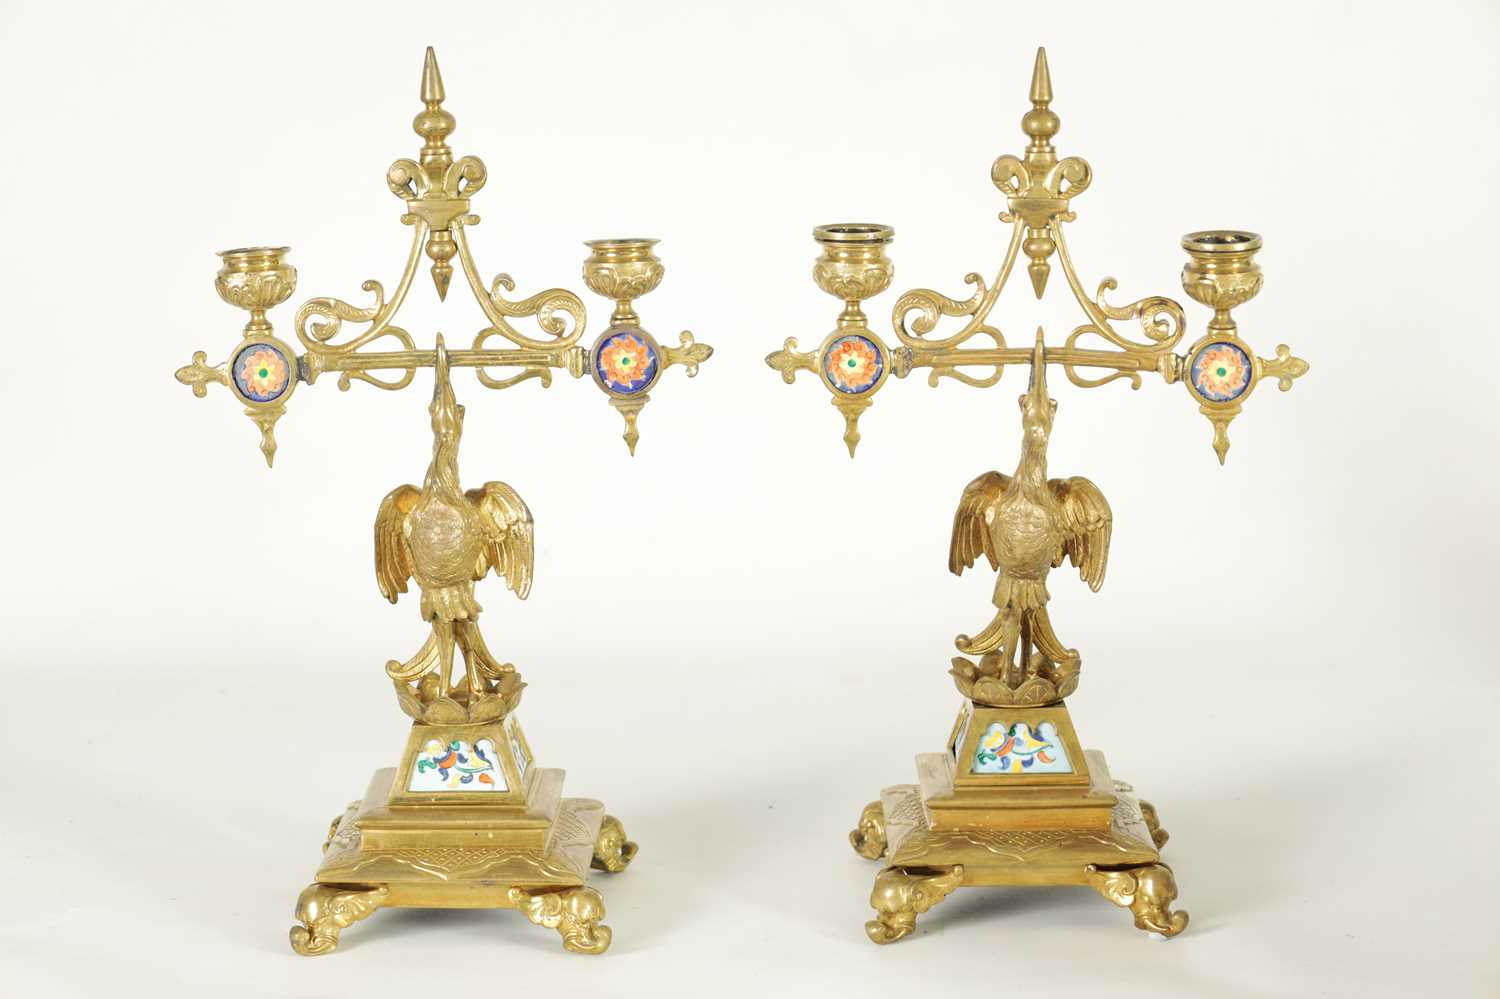 A PAIR OF LATE 19TH CENTURY BRASS AESTHETIC PERIOD DOUBLE BRANCH CANDELABRA - Image 7 of 10